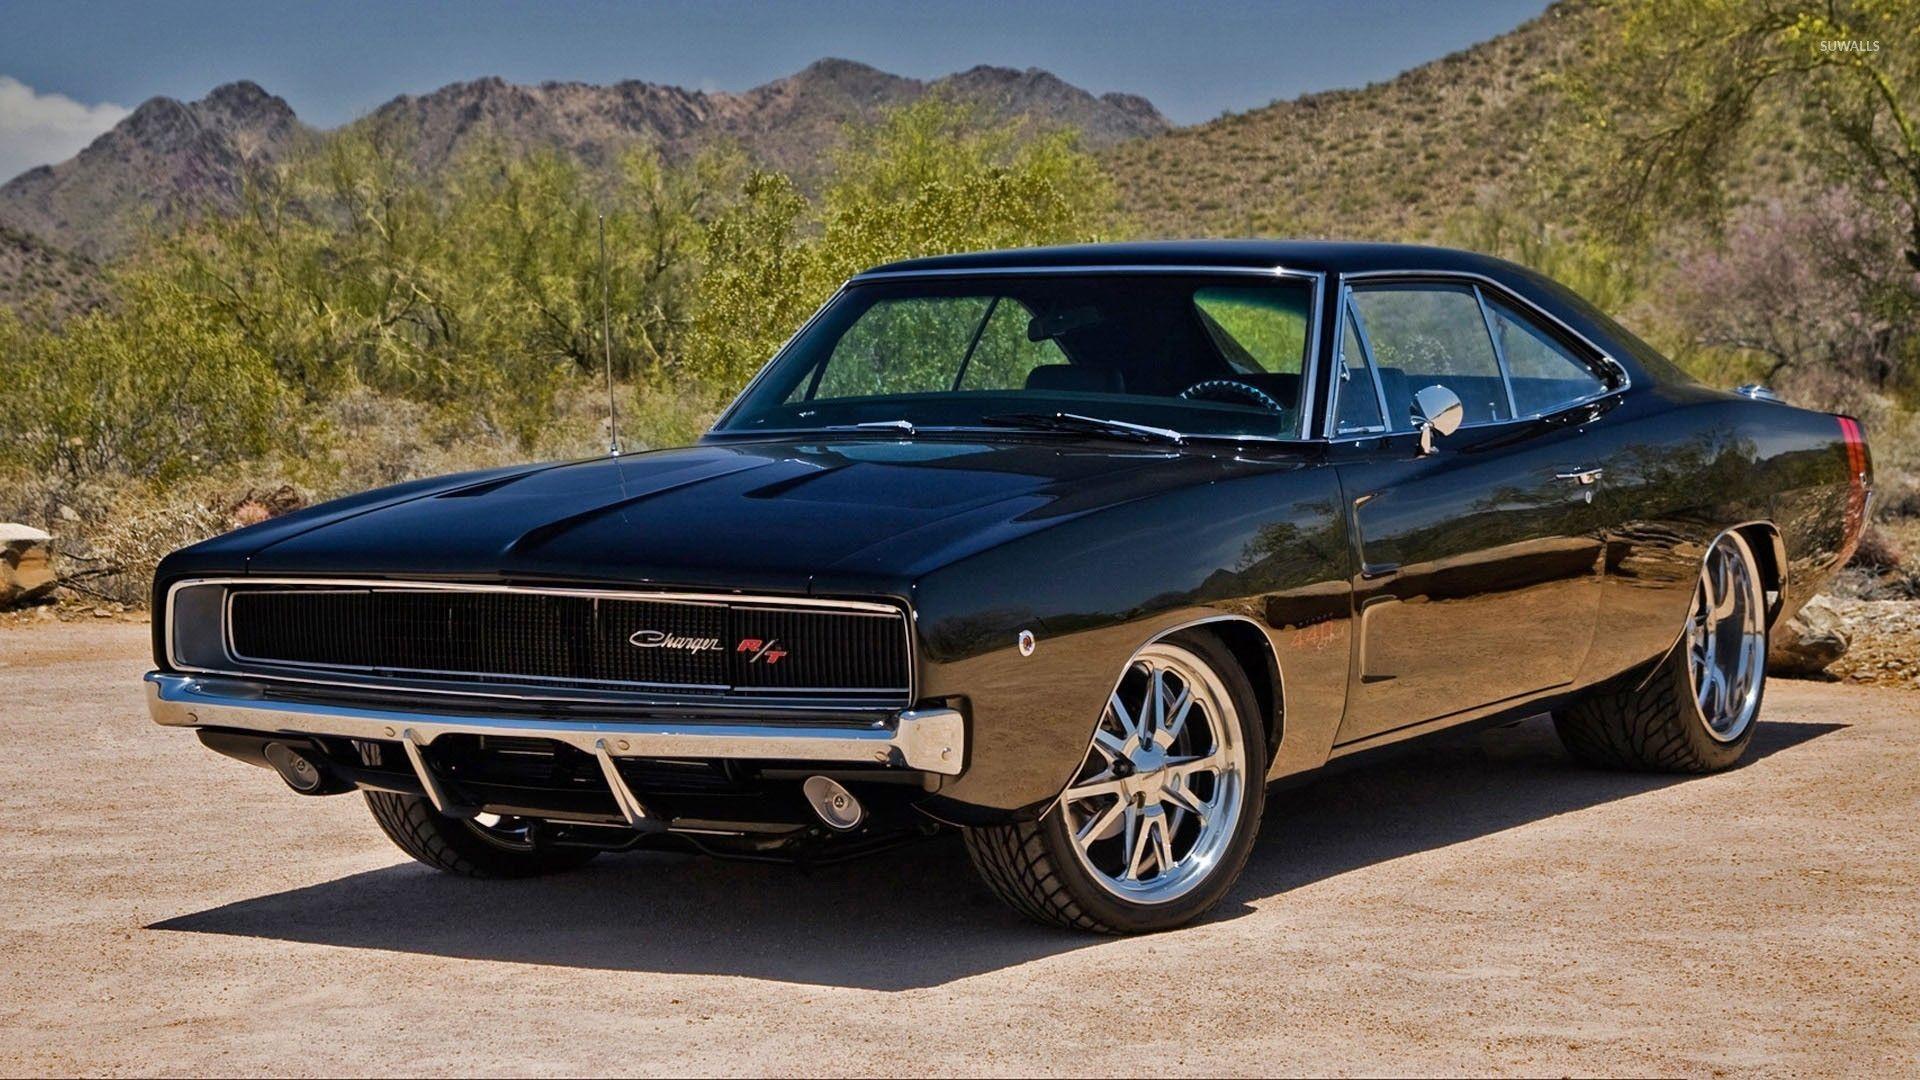 Dodge Charger R T Front Side View Wallpaper Wallpaper